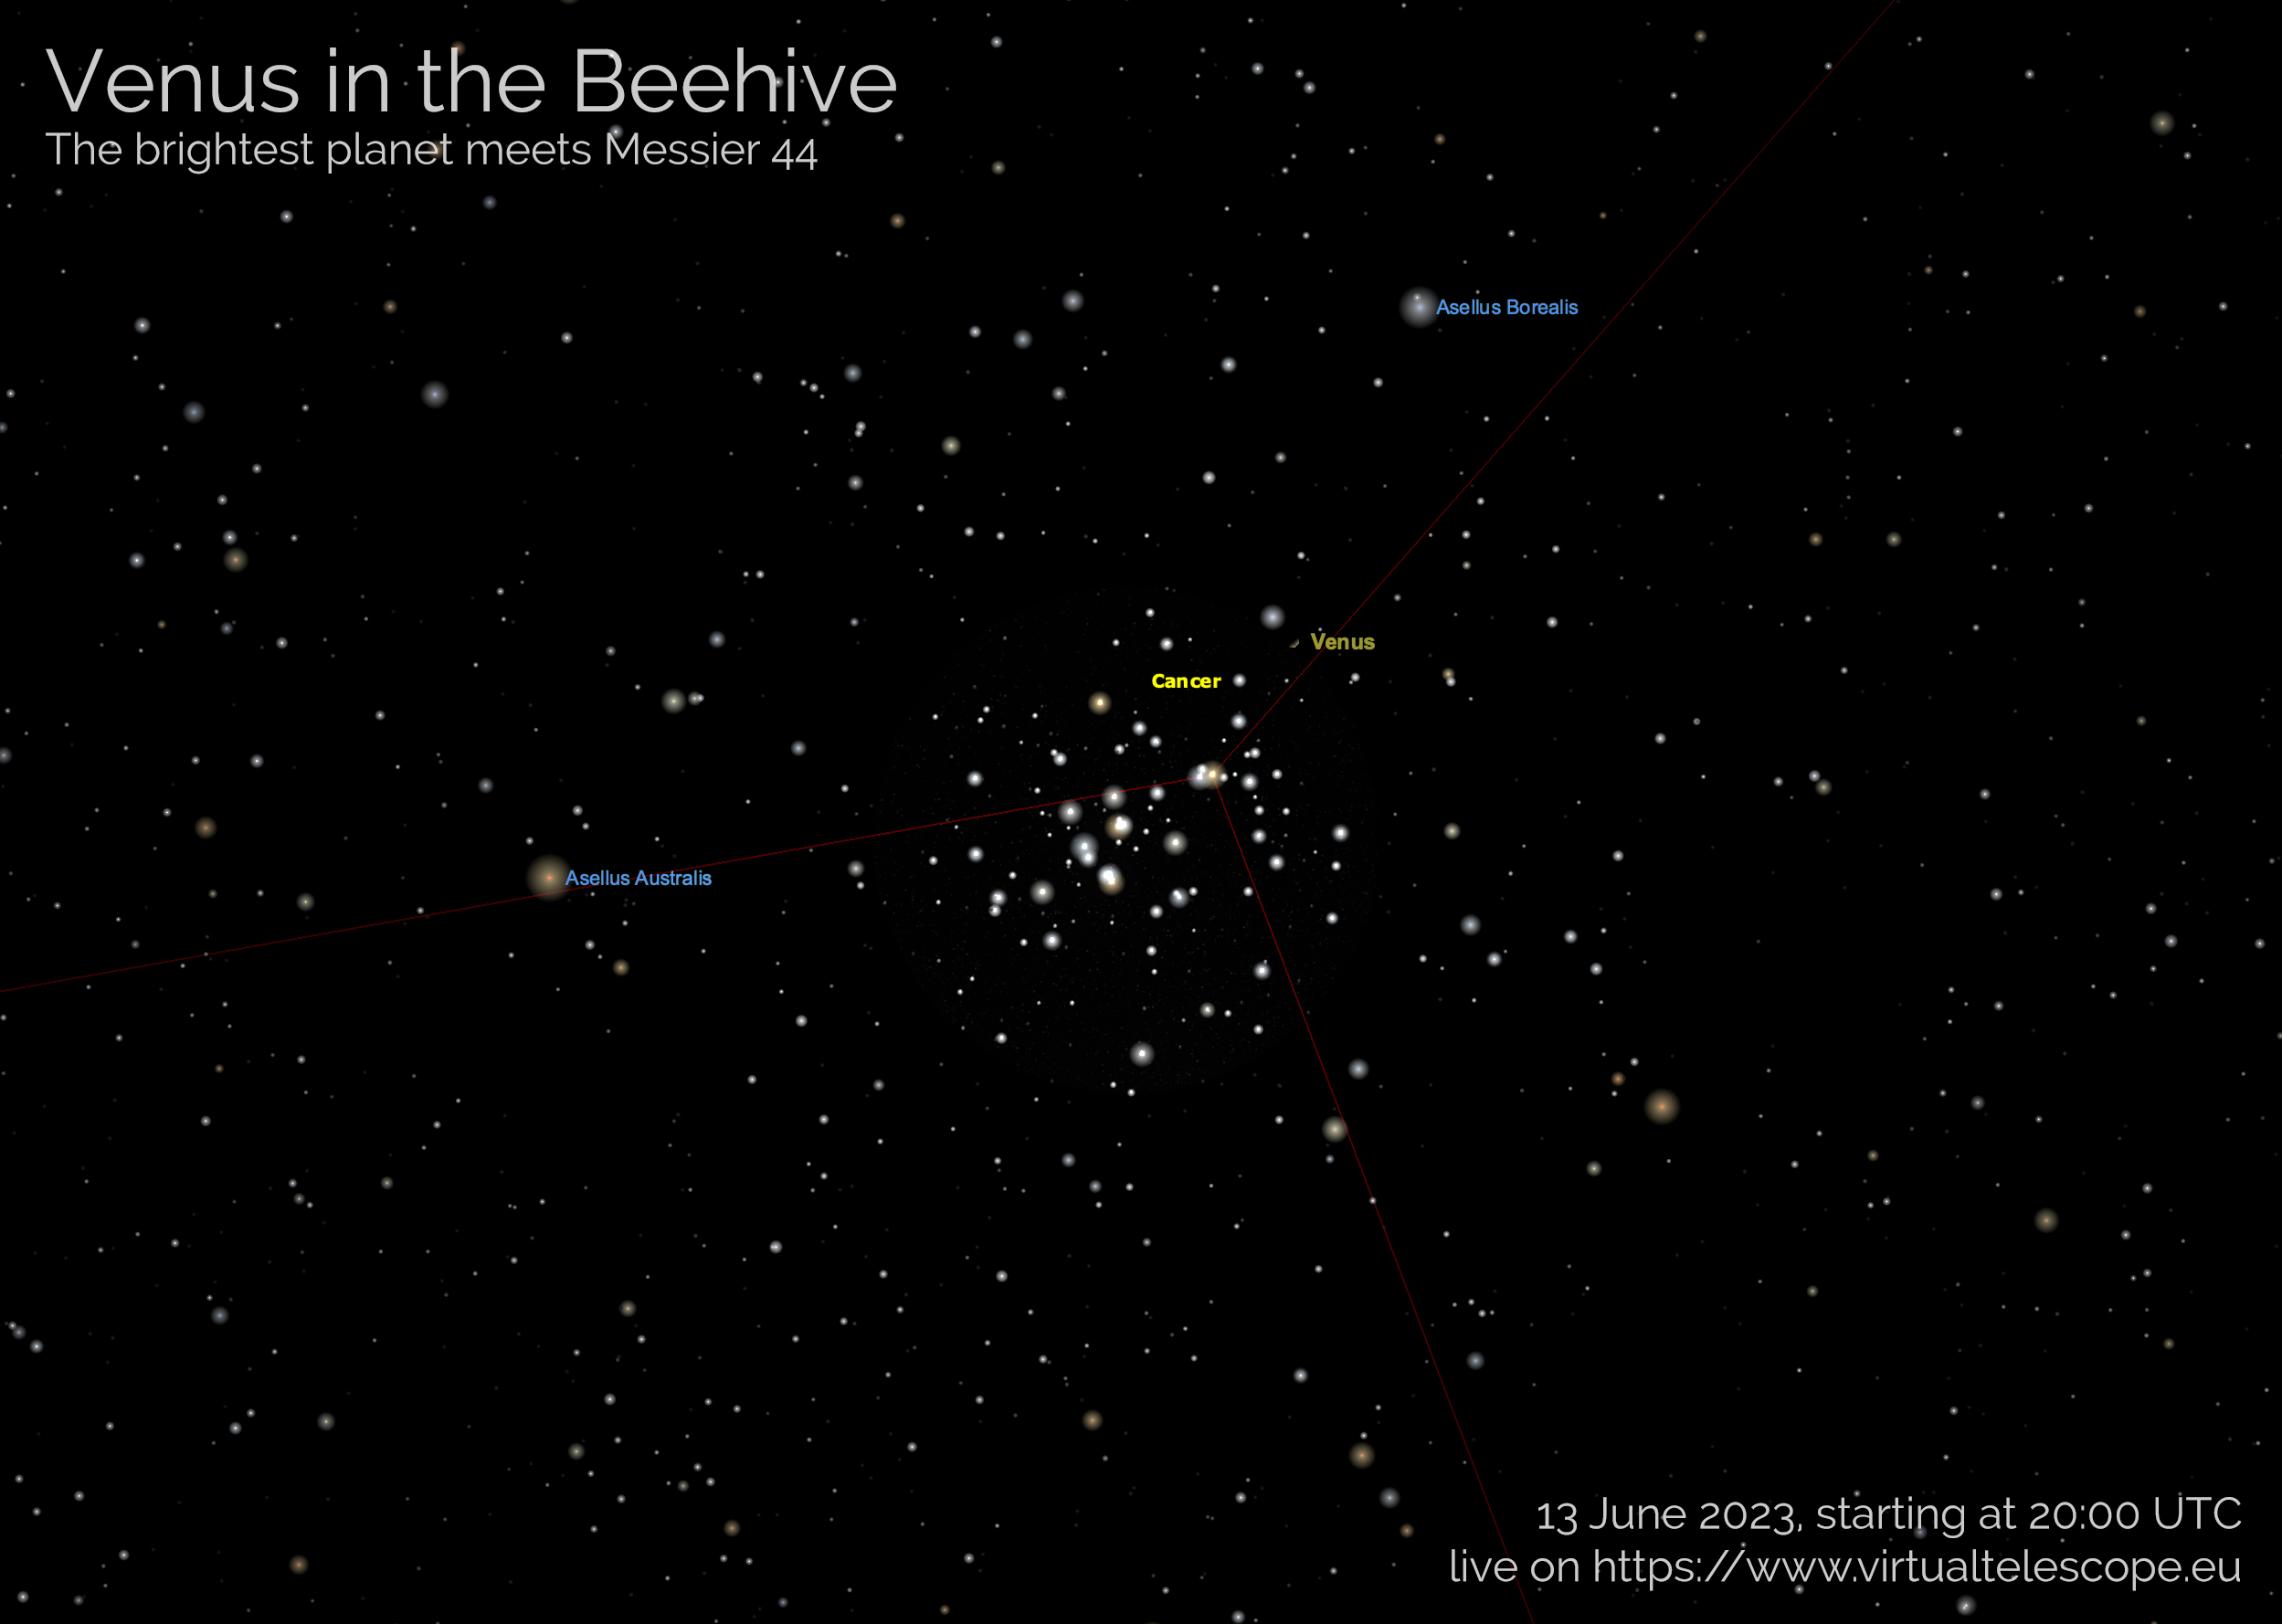 Venus and Messier 44 (aka the Beehive) star cluster: poster of the event.